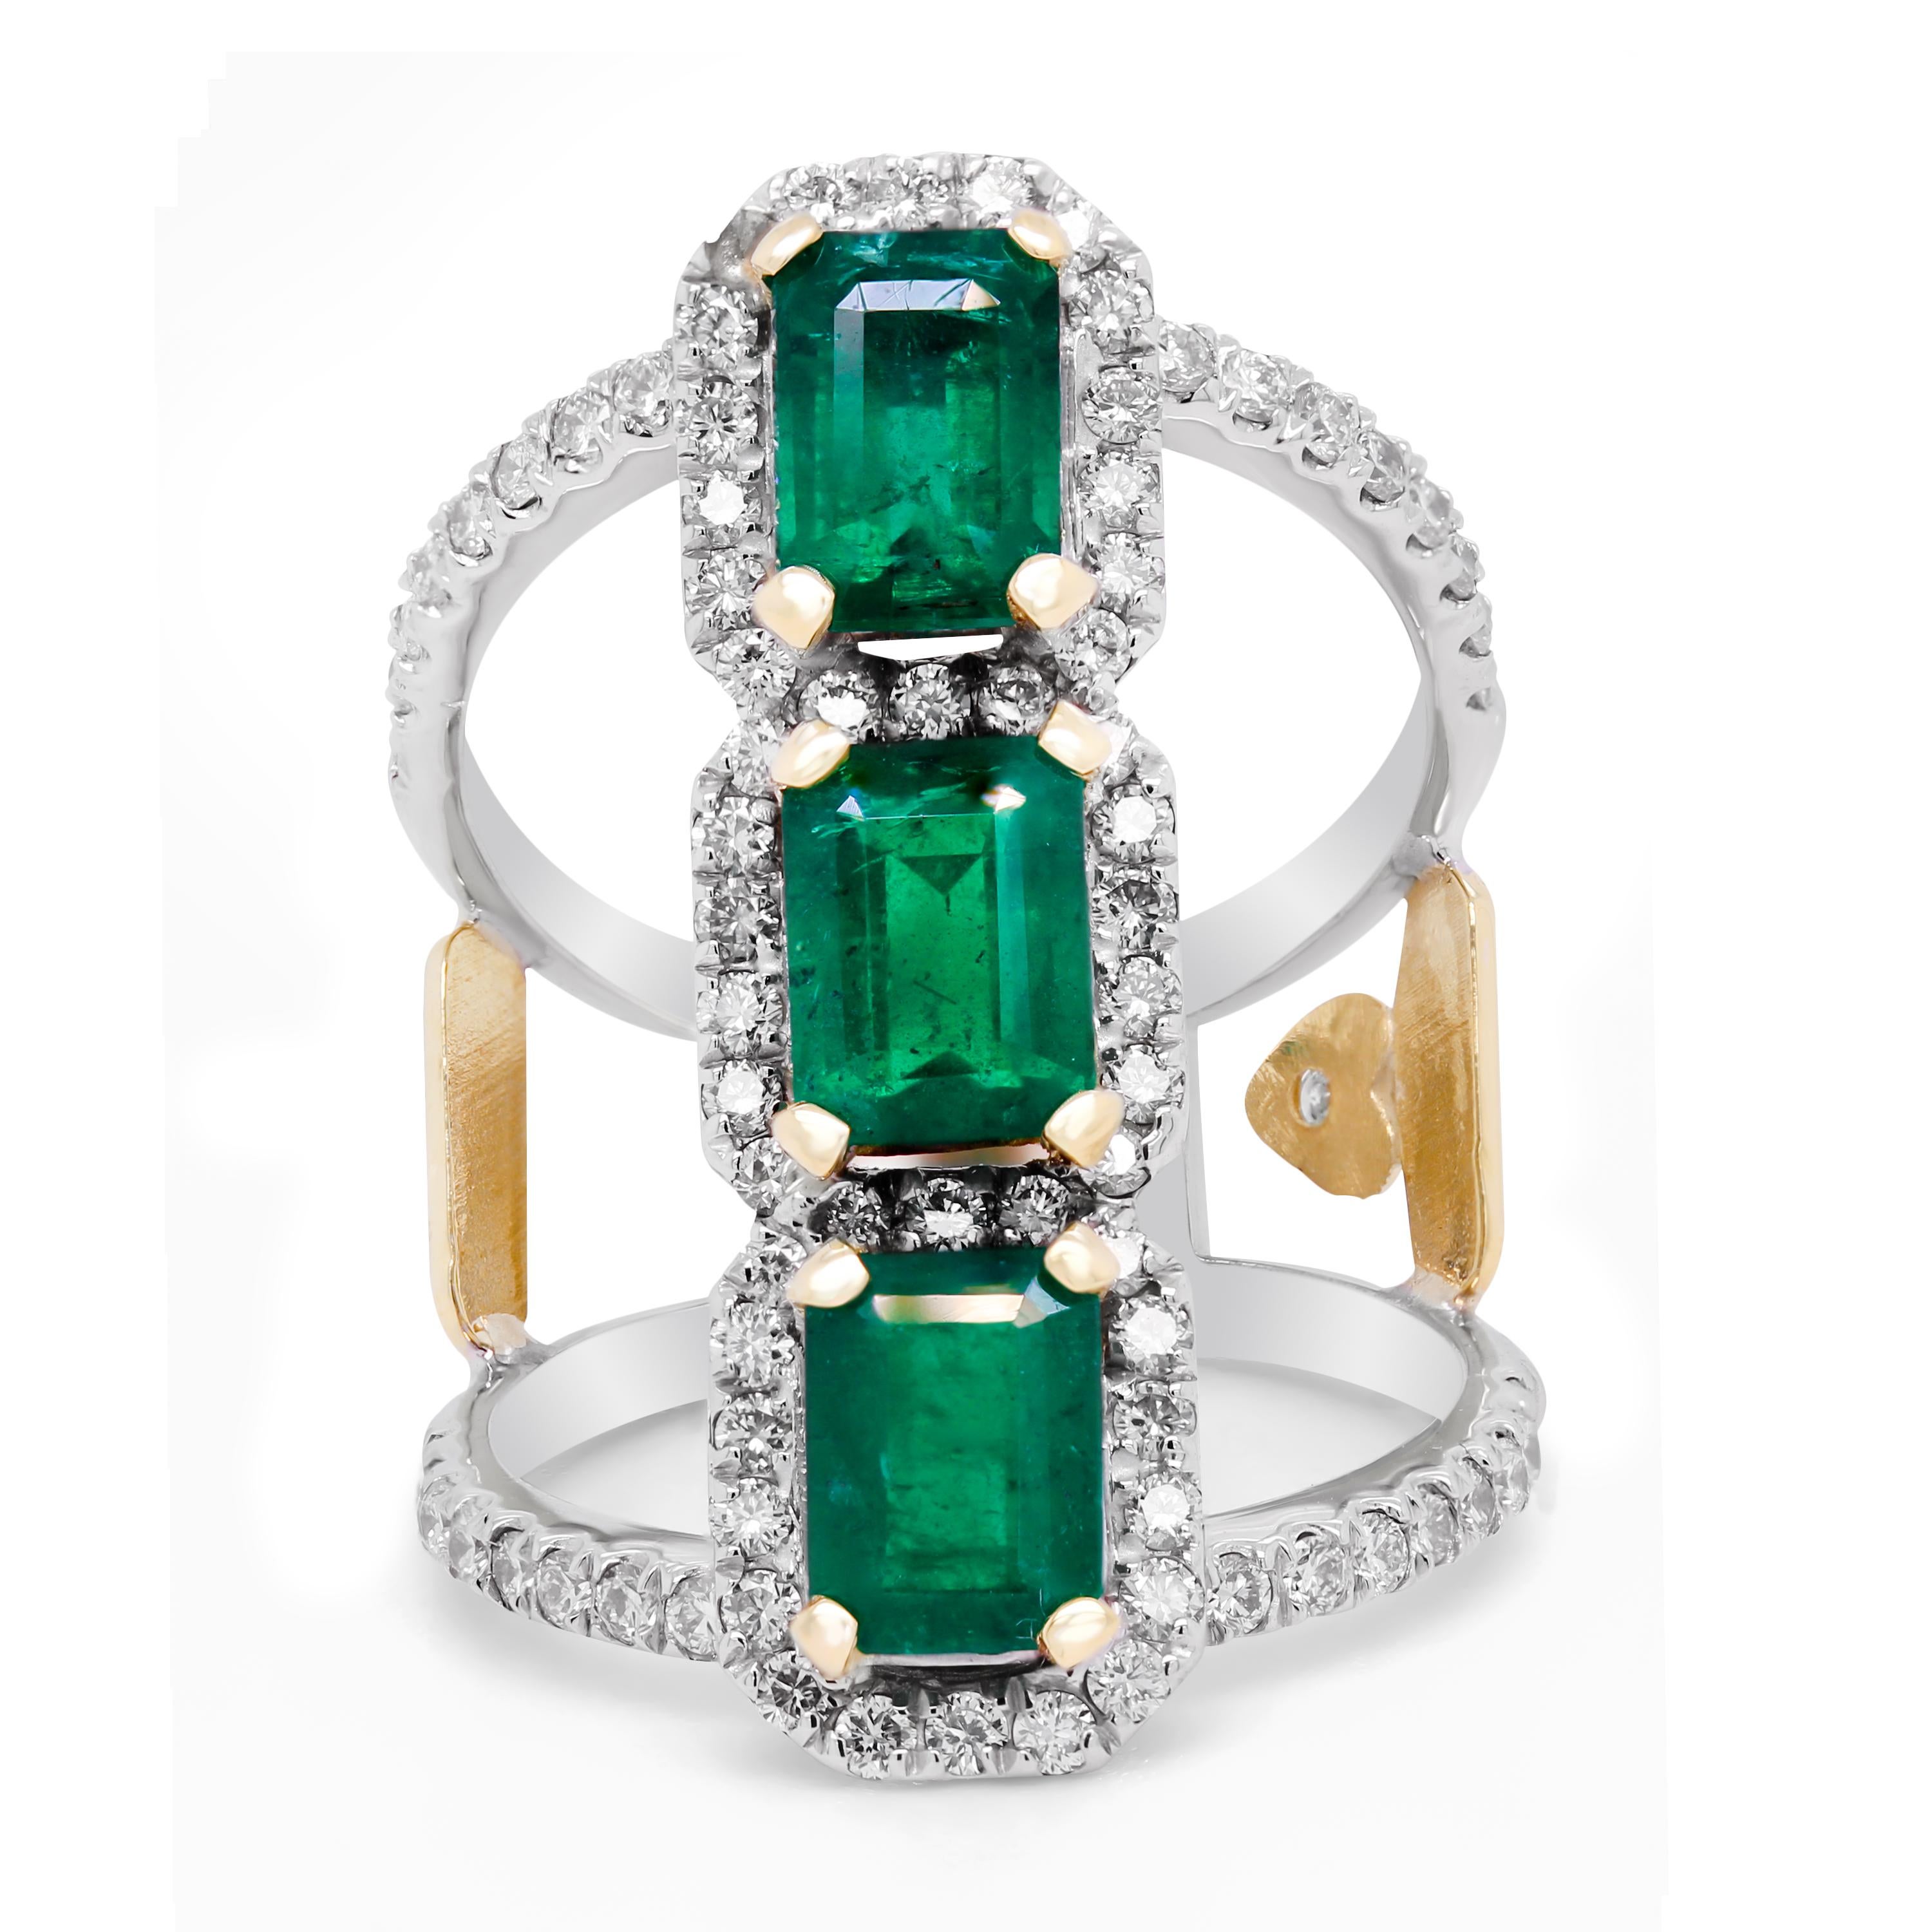 Stambolian 18K Gold and Diamond Colombian Emeralds Three Stone Wide Ring

This one-of-a-kind ring features three Colombian Emeralds with diamonds surrounding along with being set on the band

2.72 carat Colombian Emeralds

1.02 carat G color, VS